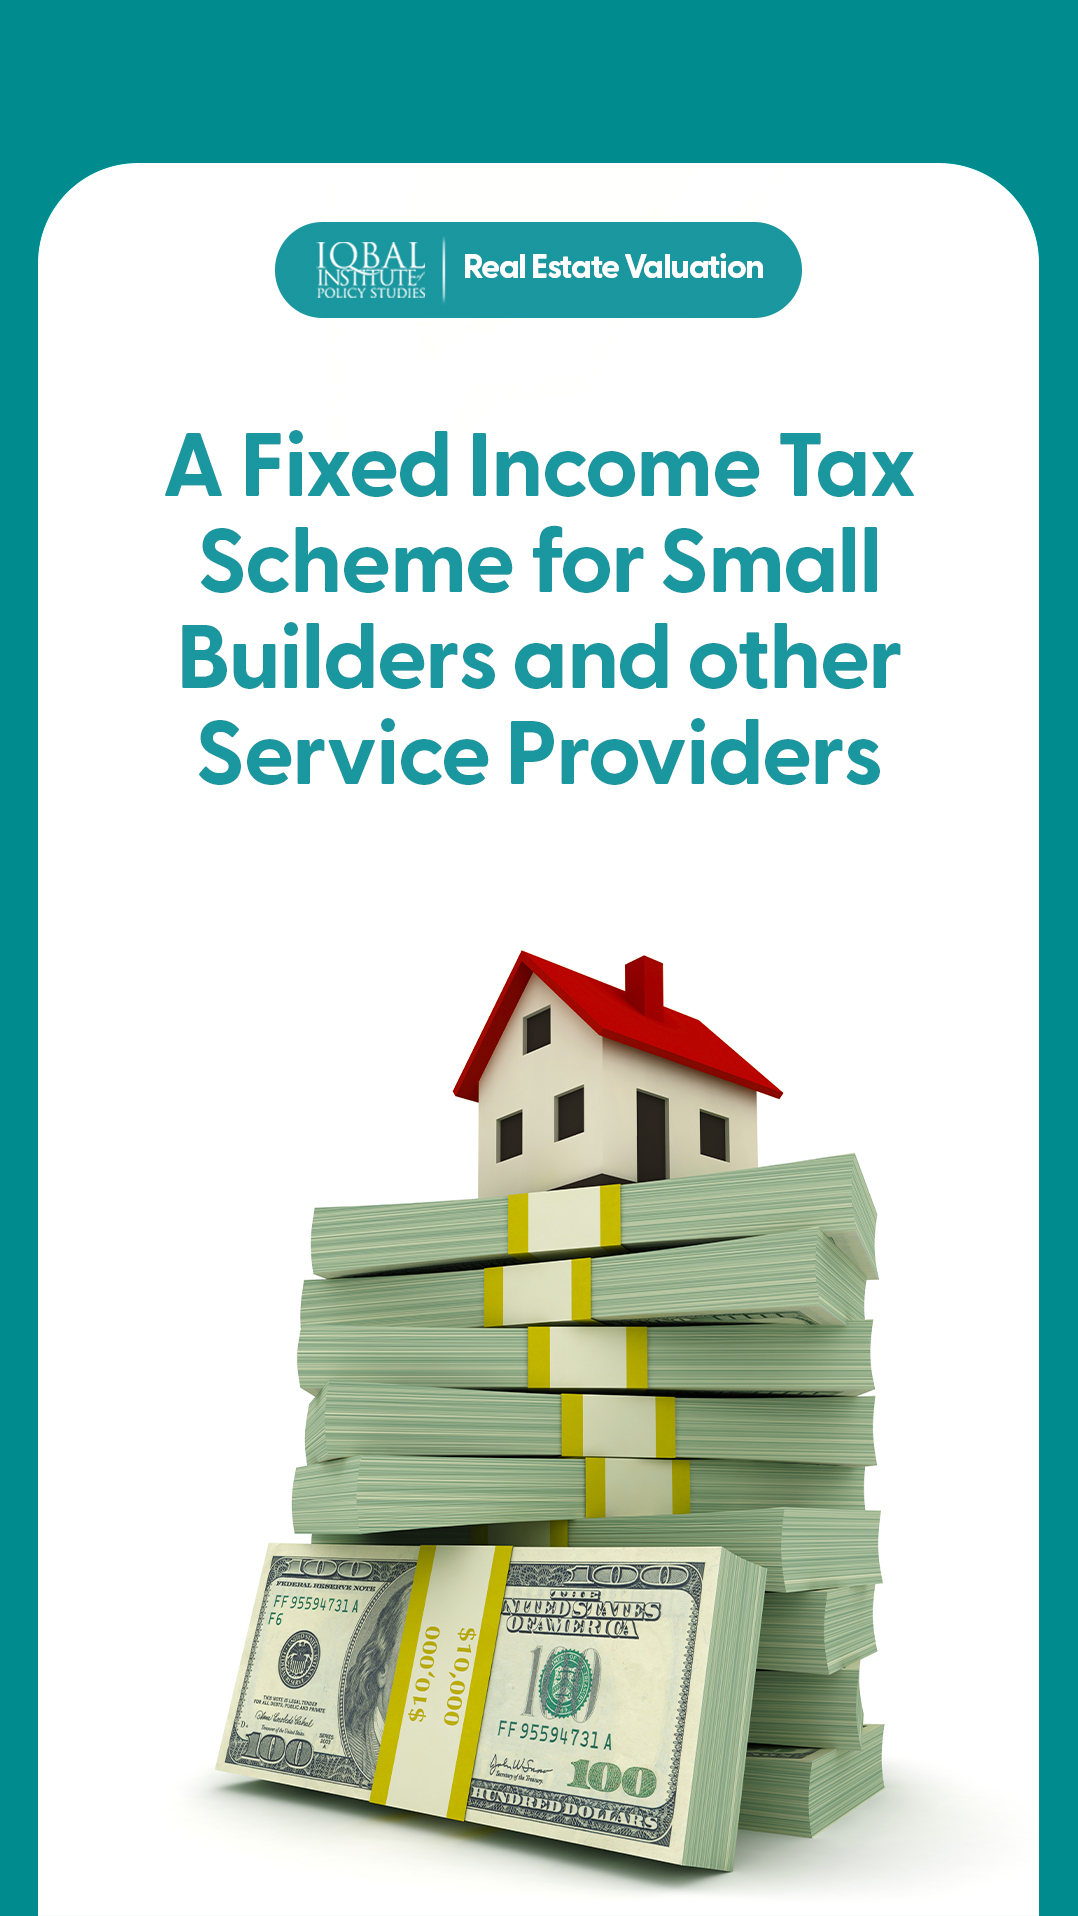 A fixed income tax scheme for small builders and others service providers